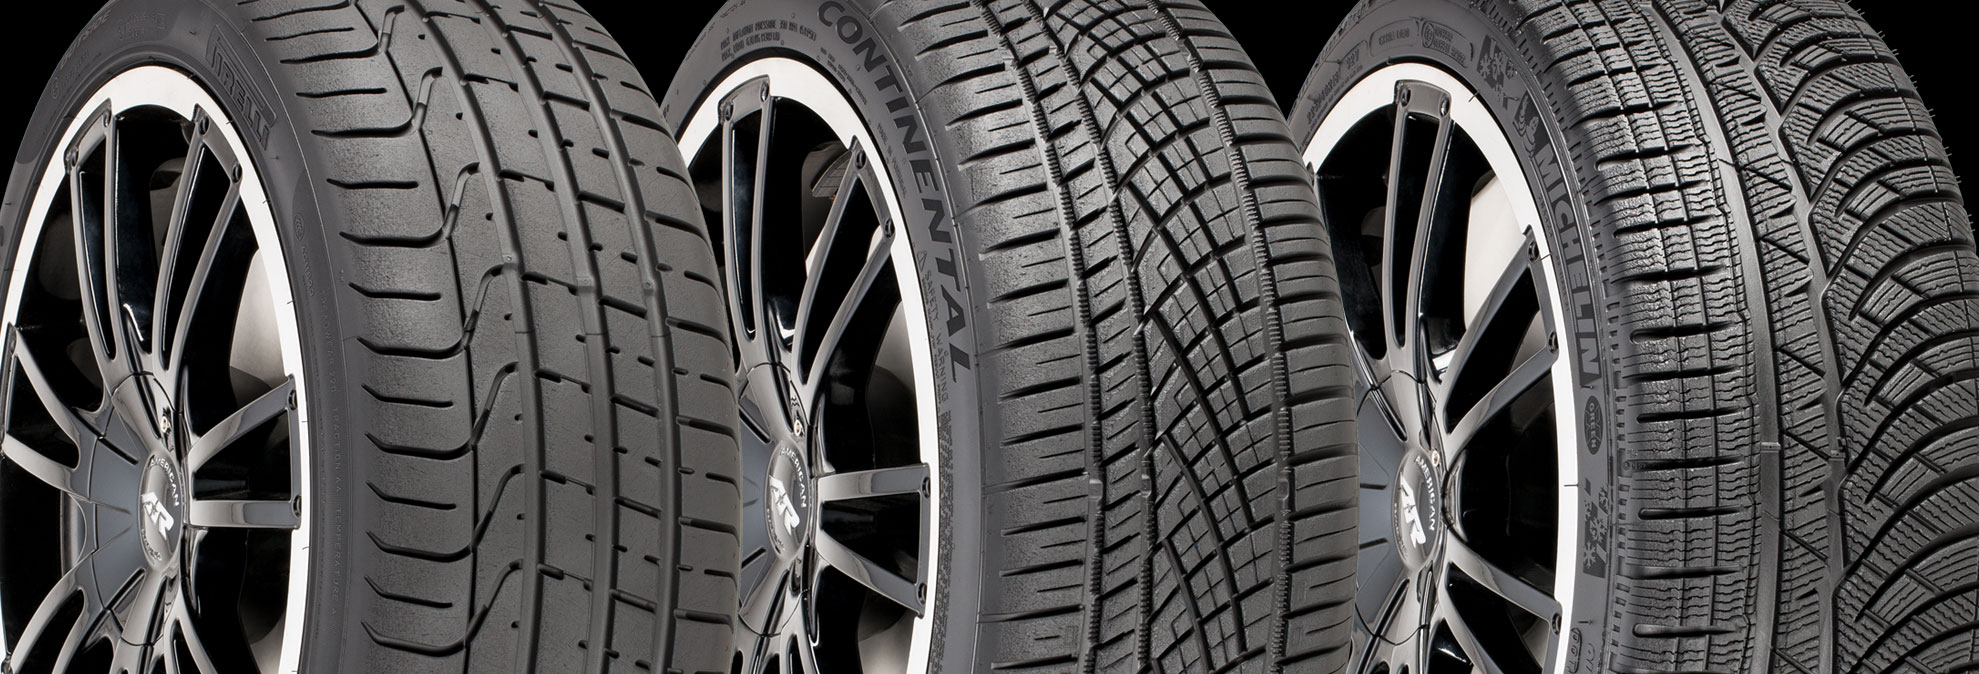 What are the top-rated off-road tire brands for a Nissan Pathfinder?